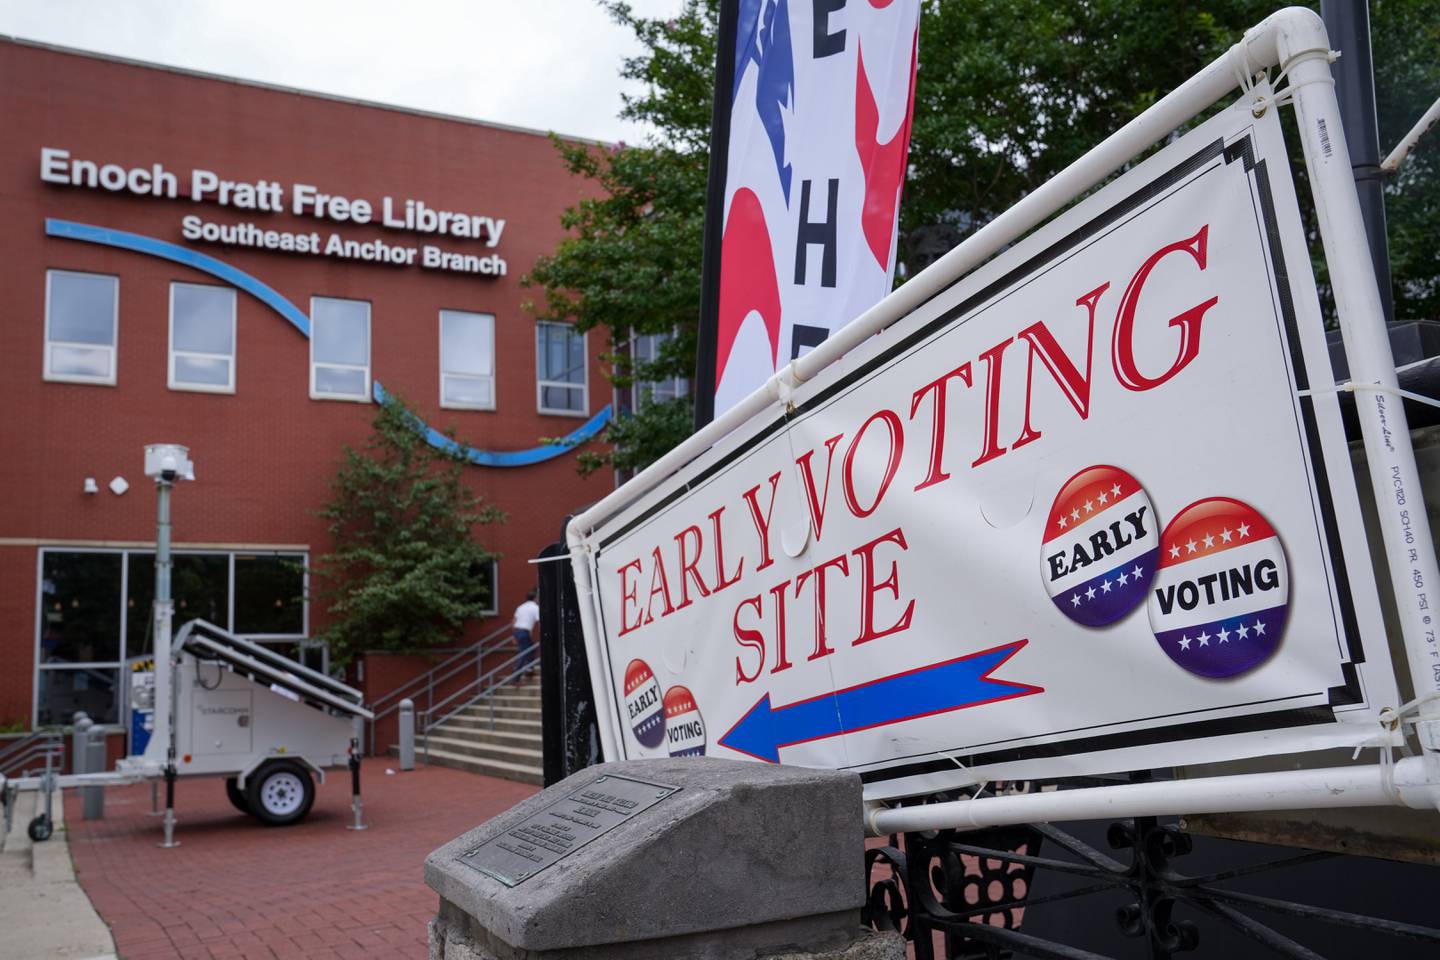 7/7/22—An early voting sign sits outside the Southeast Anchor Branch of the Enoch Pratt Free Library on the first day of early voting in Maryland’s Primary Election.